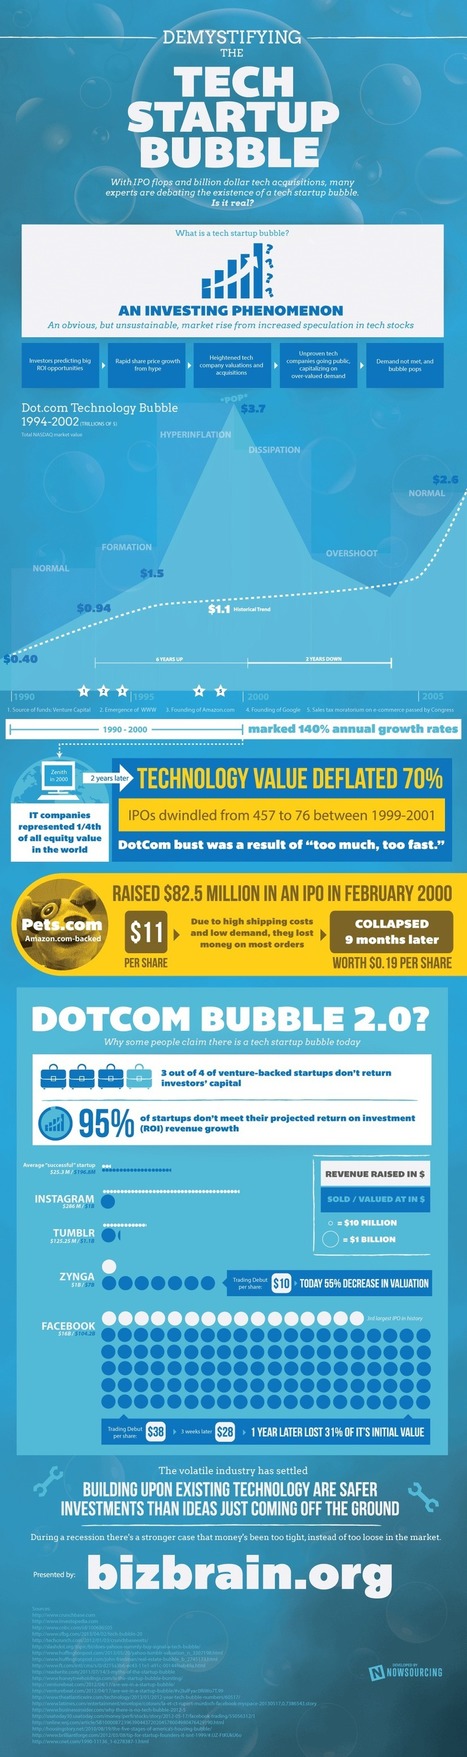 The Tech Startup Bubble: Is It Real? [INFOGRAPHIC] | Latest Social Media News | Scoop.it